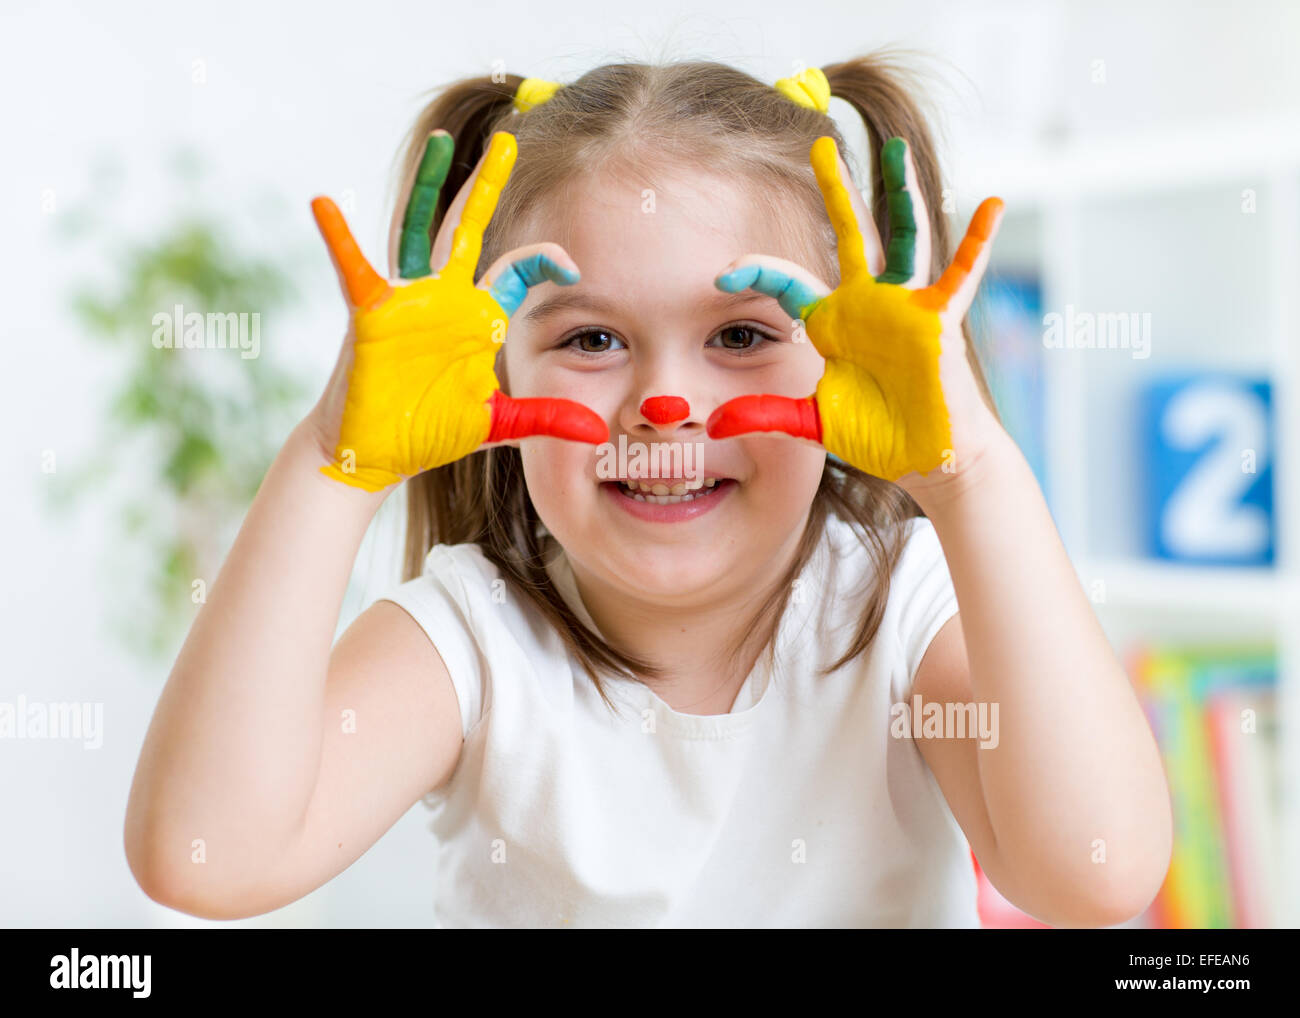 cute child have fun painting her hands Stock Photo